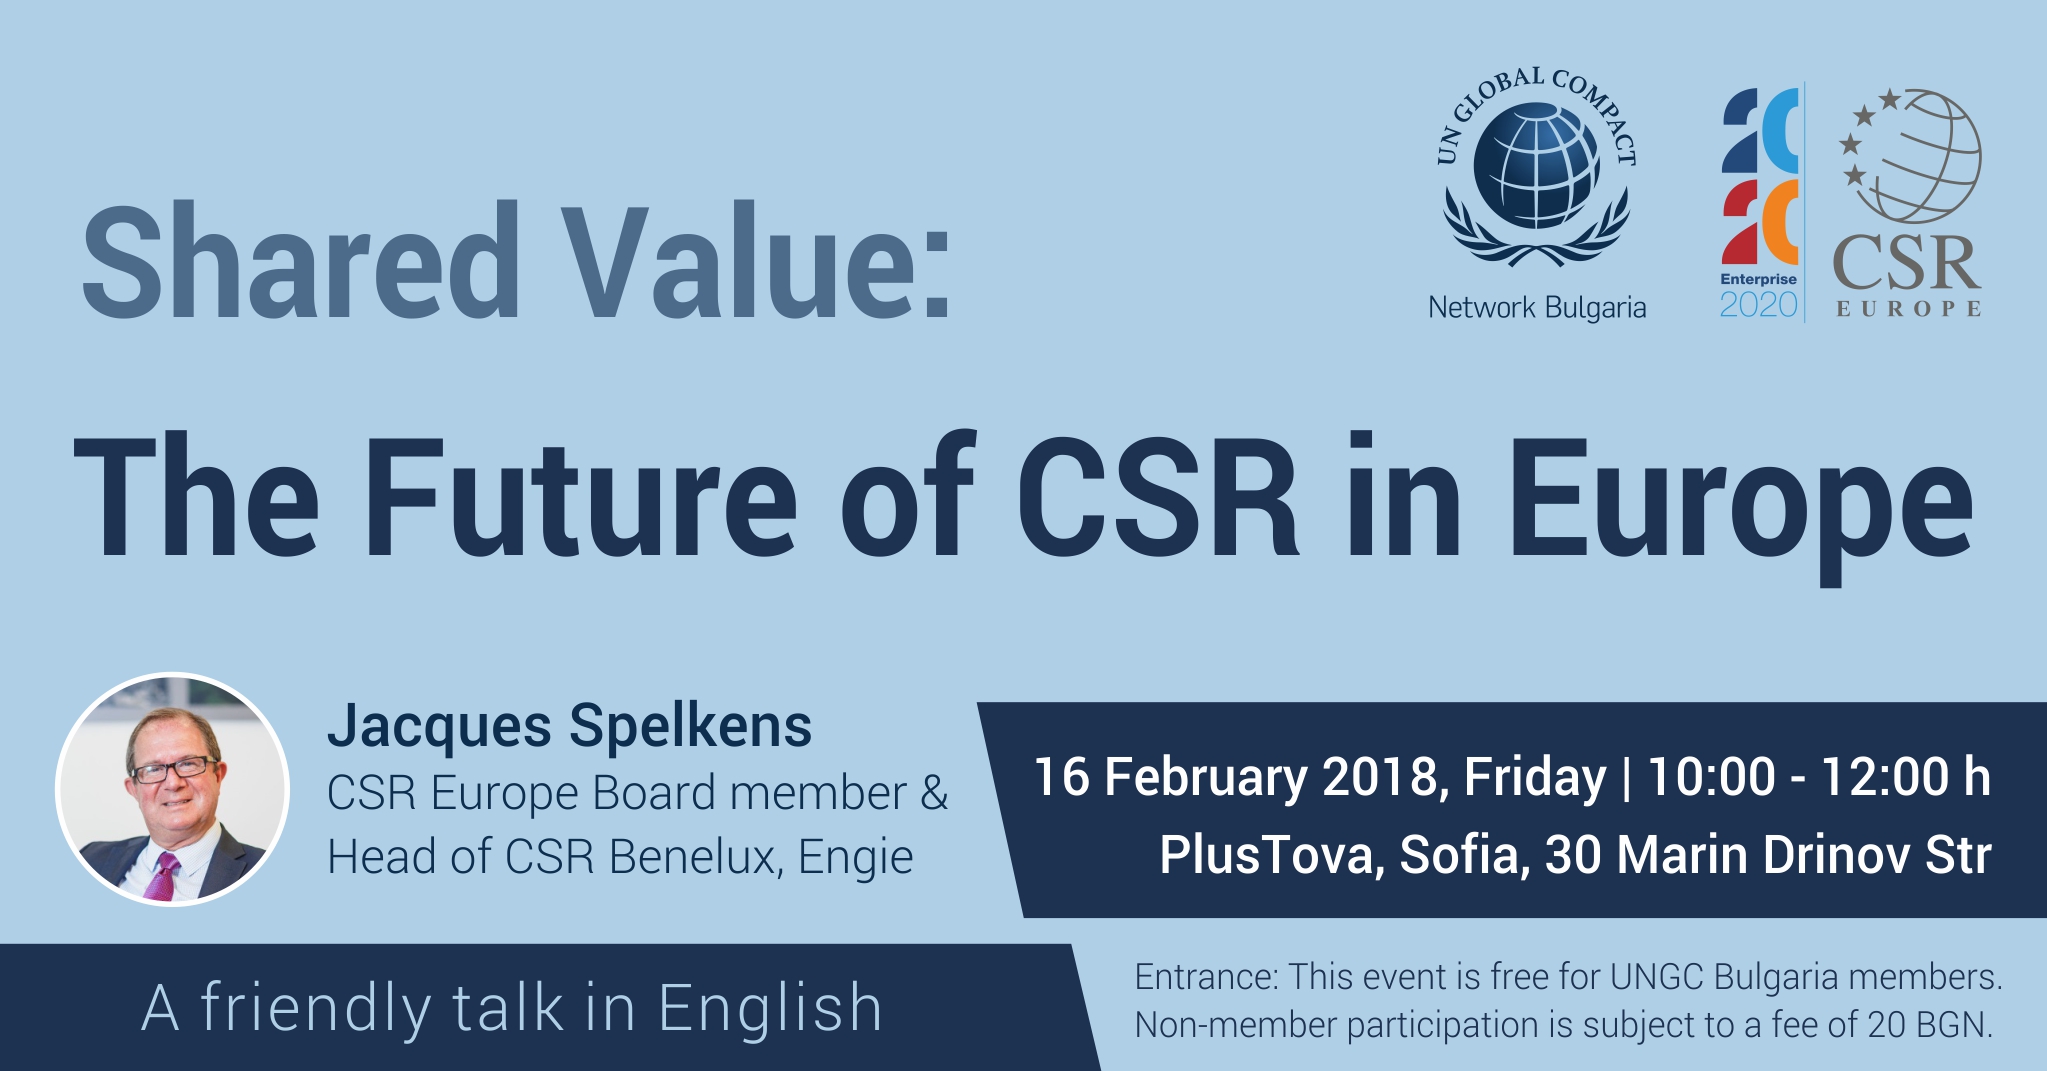 Shared Value - the Future of CSR in Europe